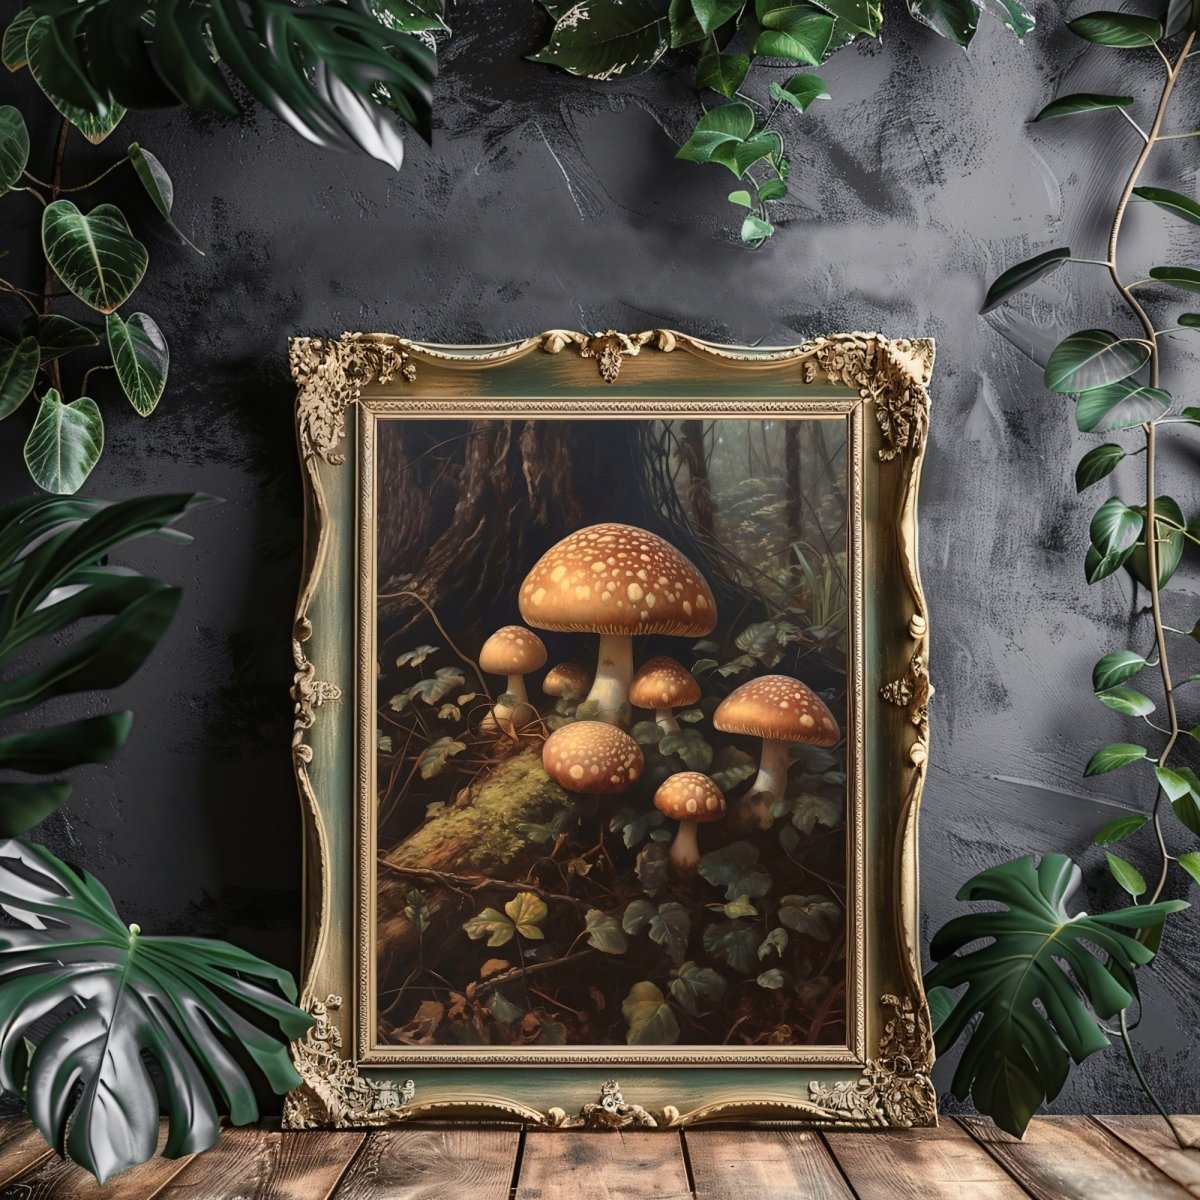 Mushrooms in Woodland Gothic Wall Art Dark Academia, Goblincore, Vintage Botanical Decor, Witchy Gothic Cottagecore, Mushroom Paper Poster Prints - Everything Pixel